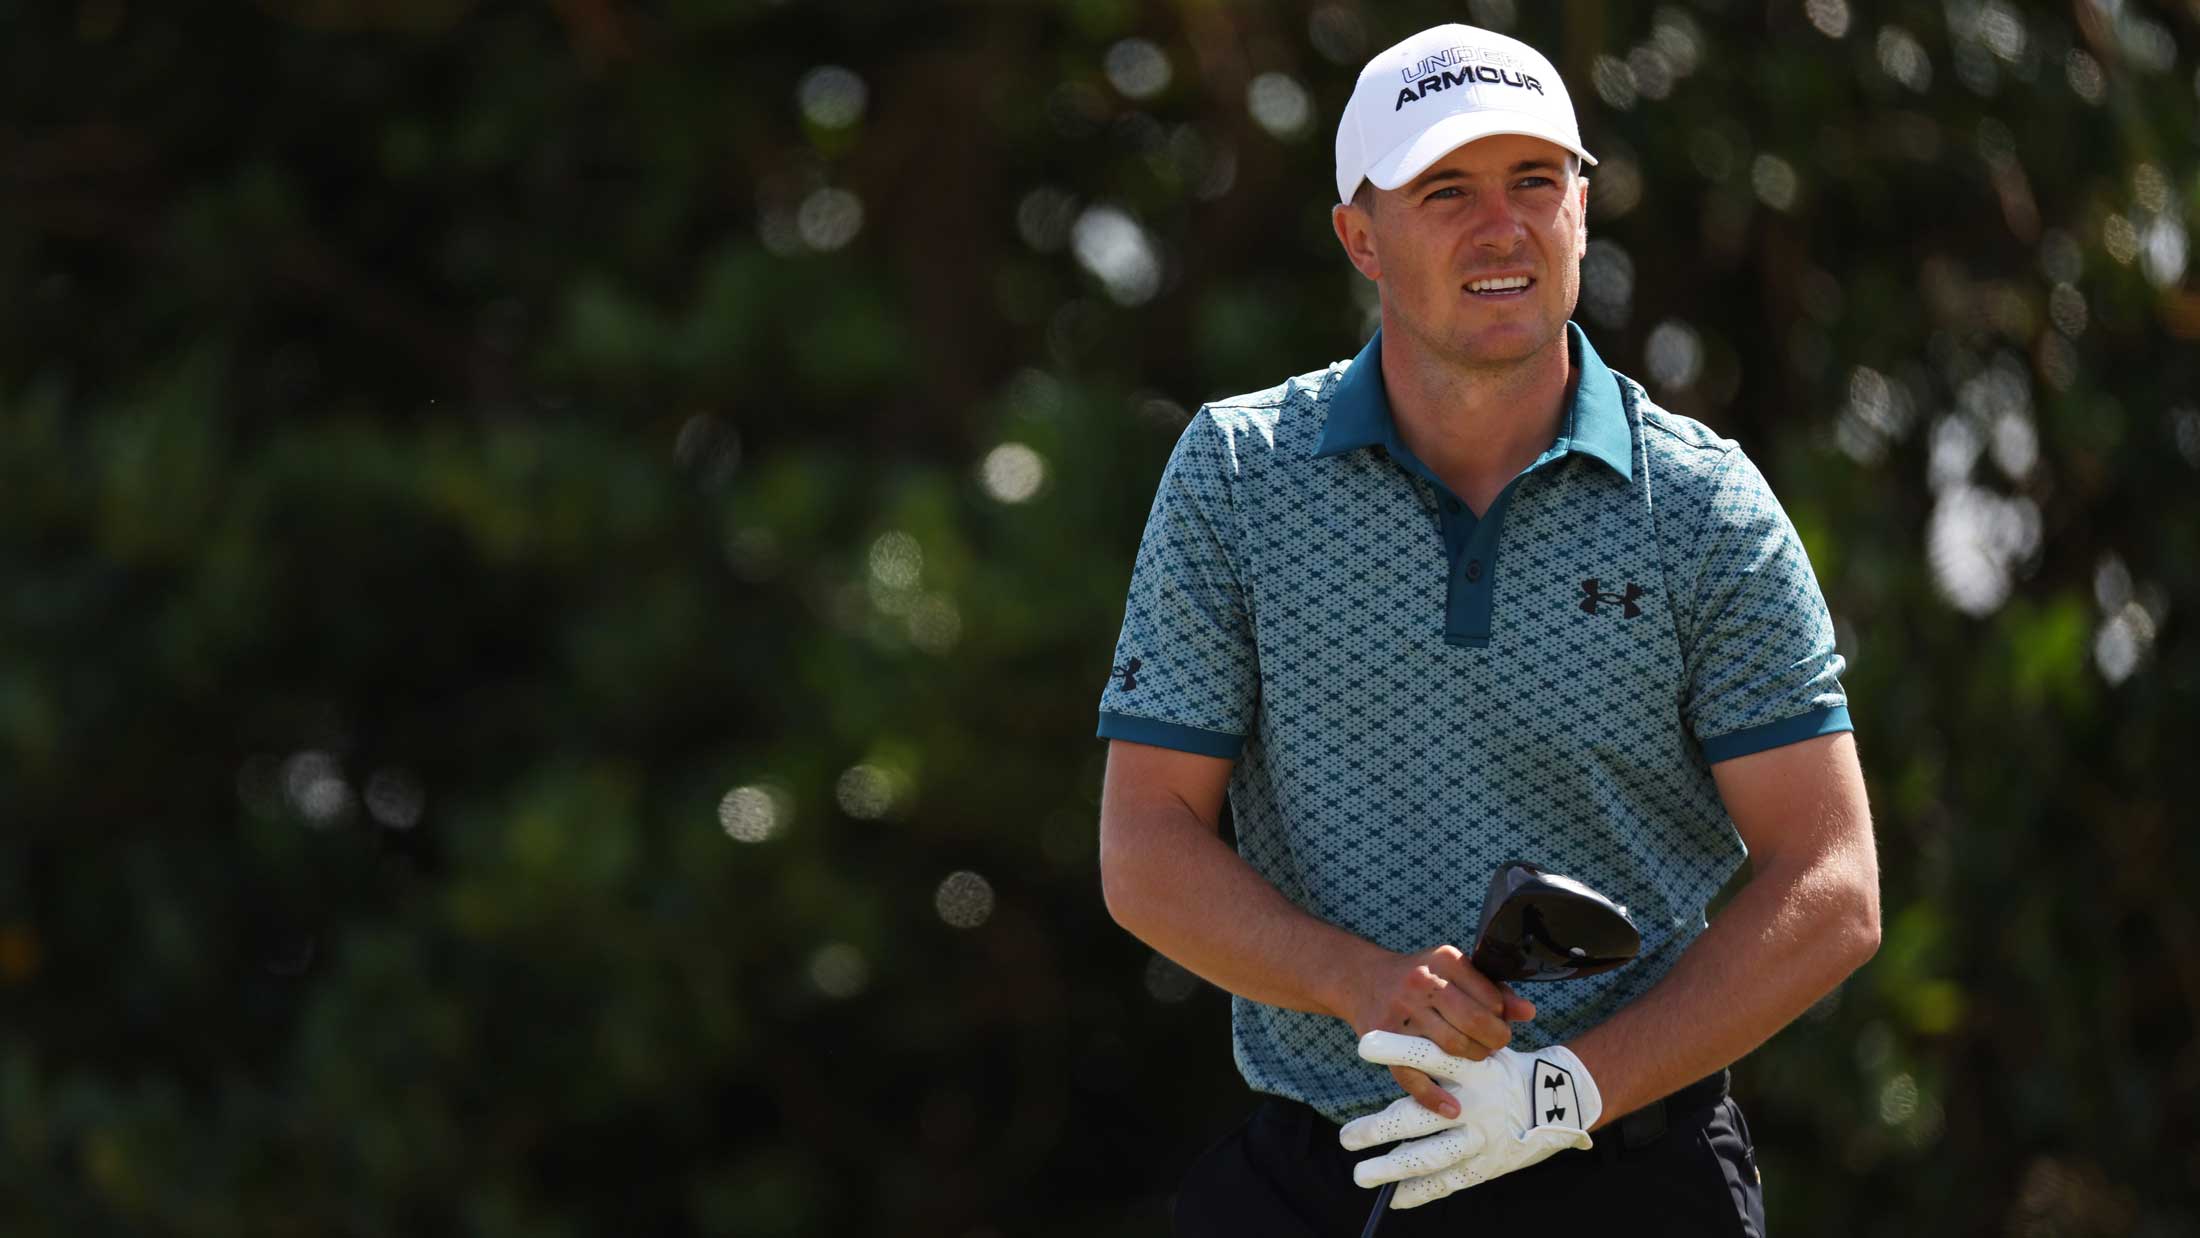 Jordan Spieth just reminded us why he's the world's most exciting golfer